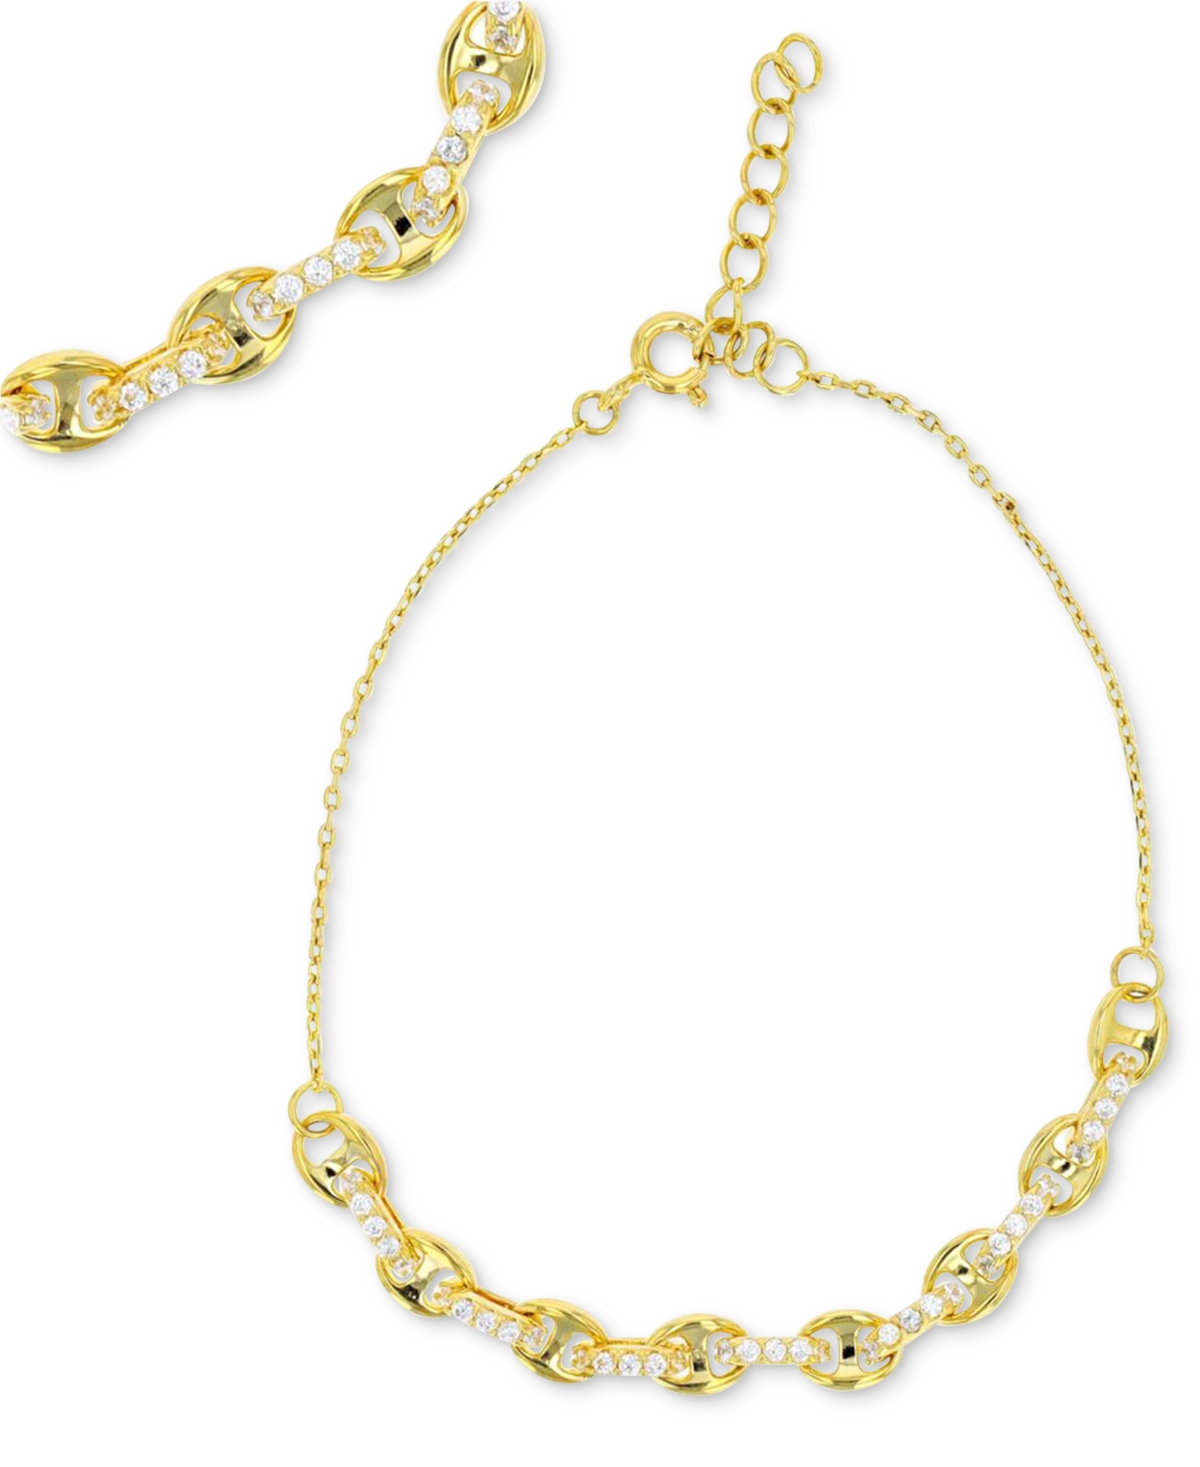 Cubic Zirconia Mariner Link Chain Bracelet in 14k Gold-Plated Sterling Silver - Gold